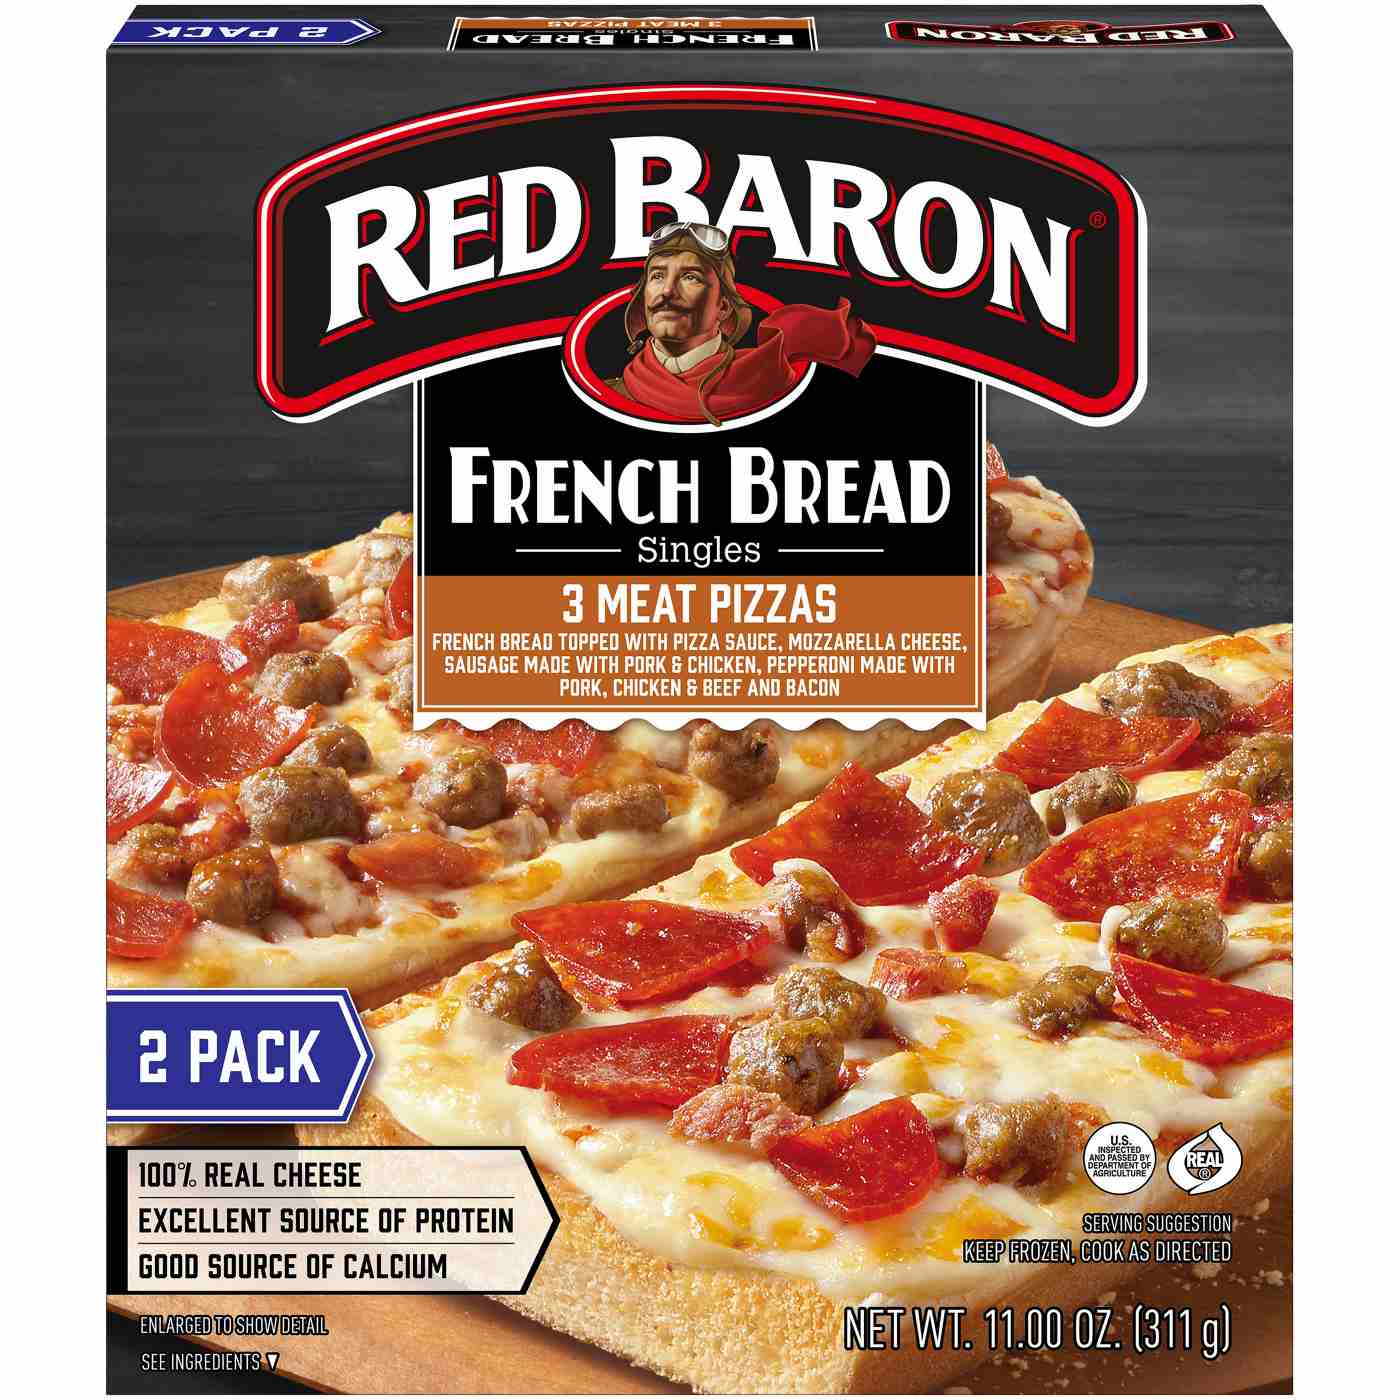 Red Baron French Bread Frozen Pizza Singles - 3 Meat; image 1 of 2